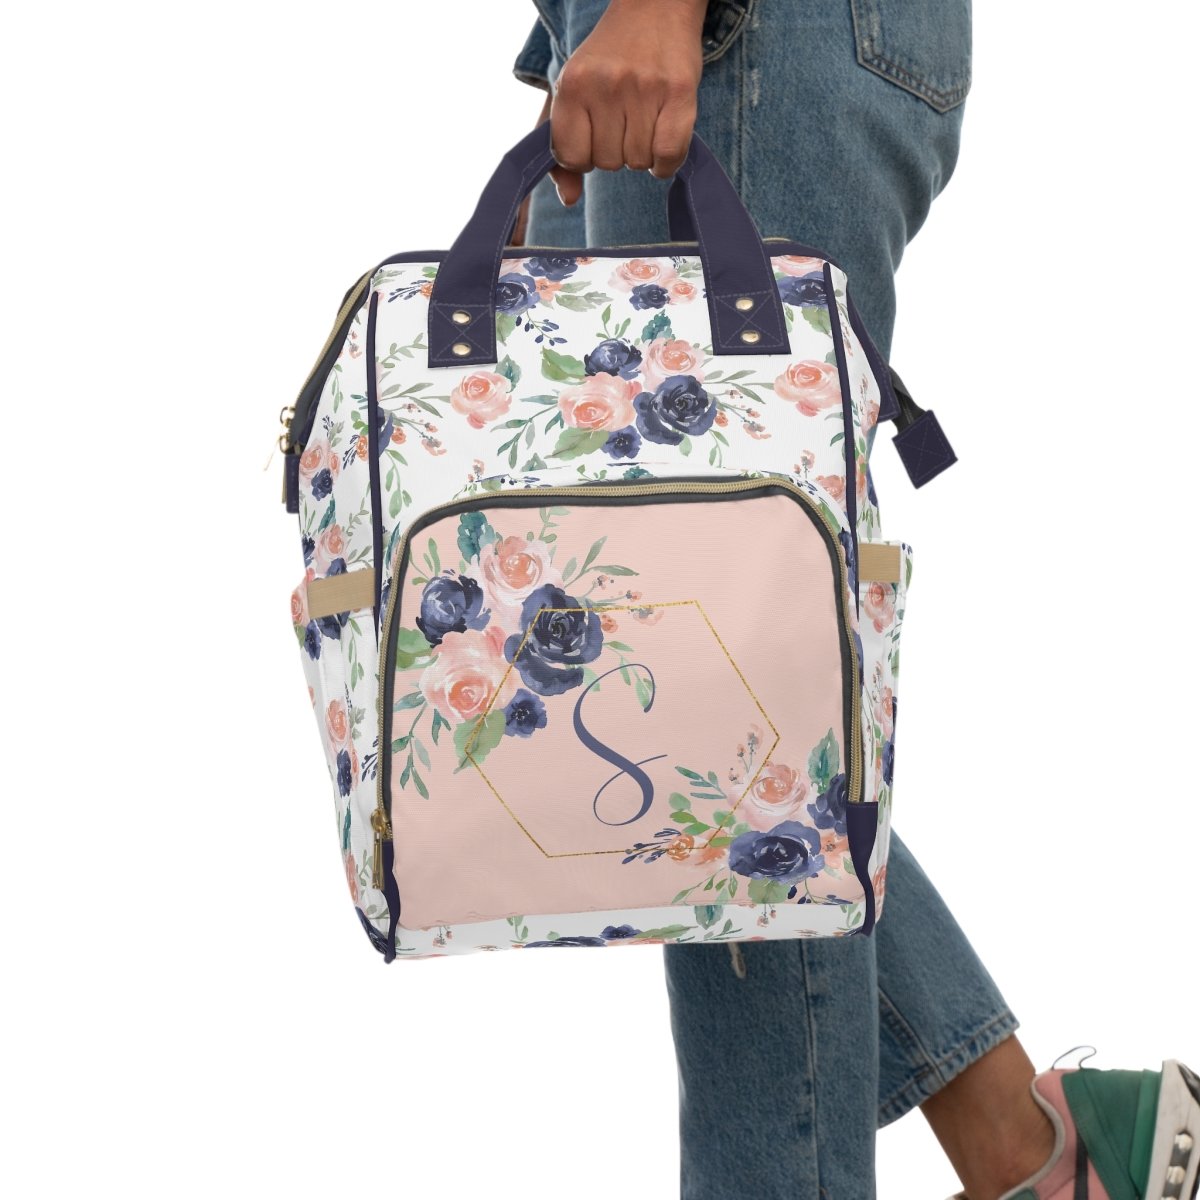 Peach & Navy Floral Personalized Backpack Diaper Bag - gender_girl, Peach & Navy Floral, text